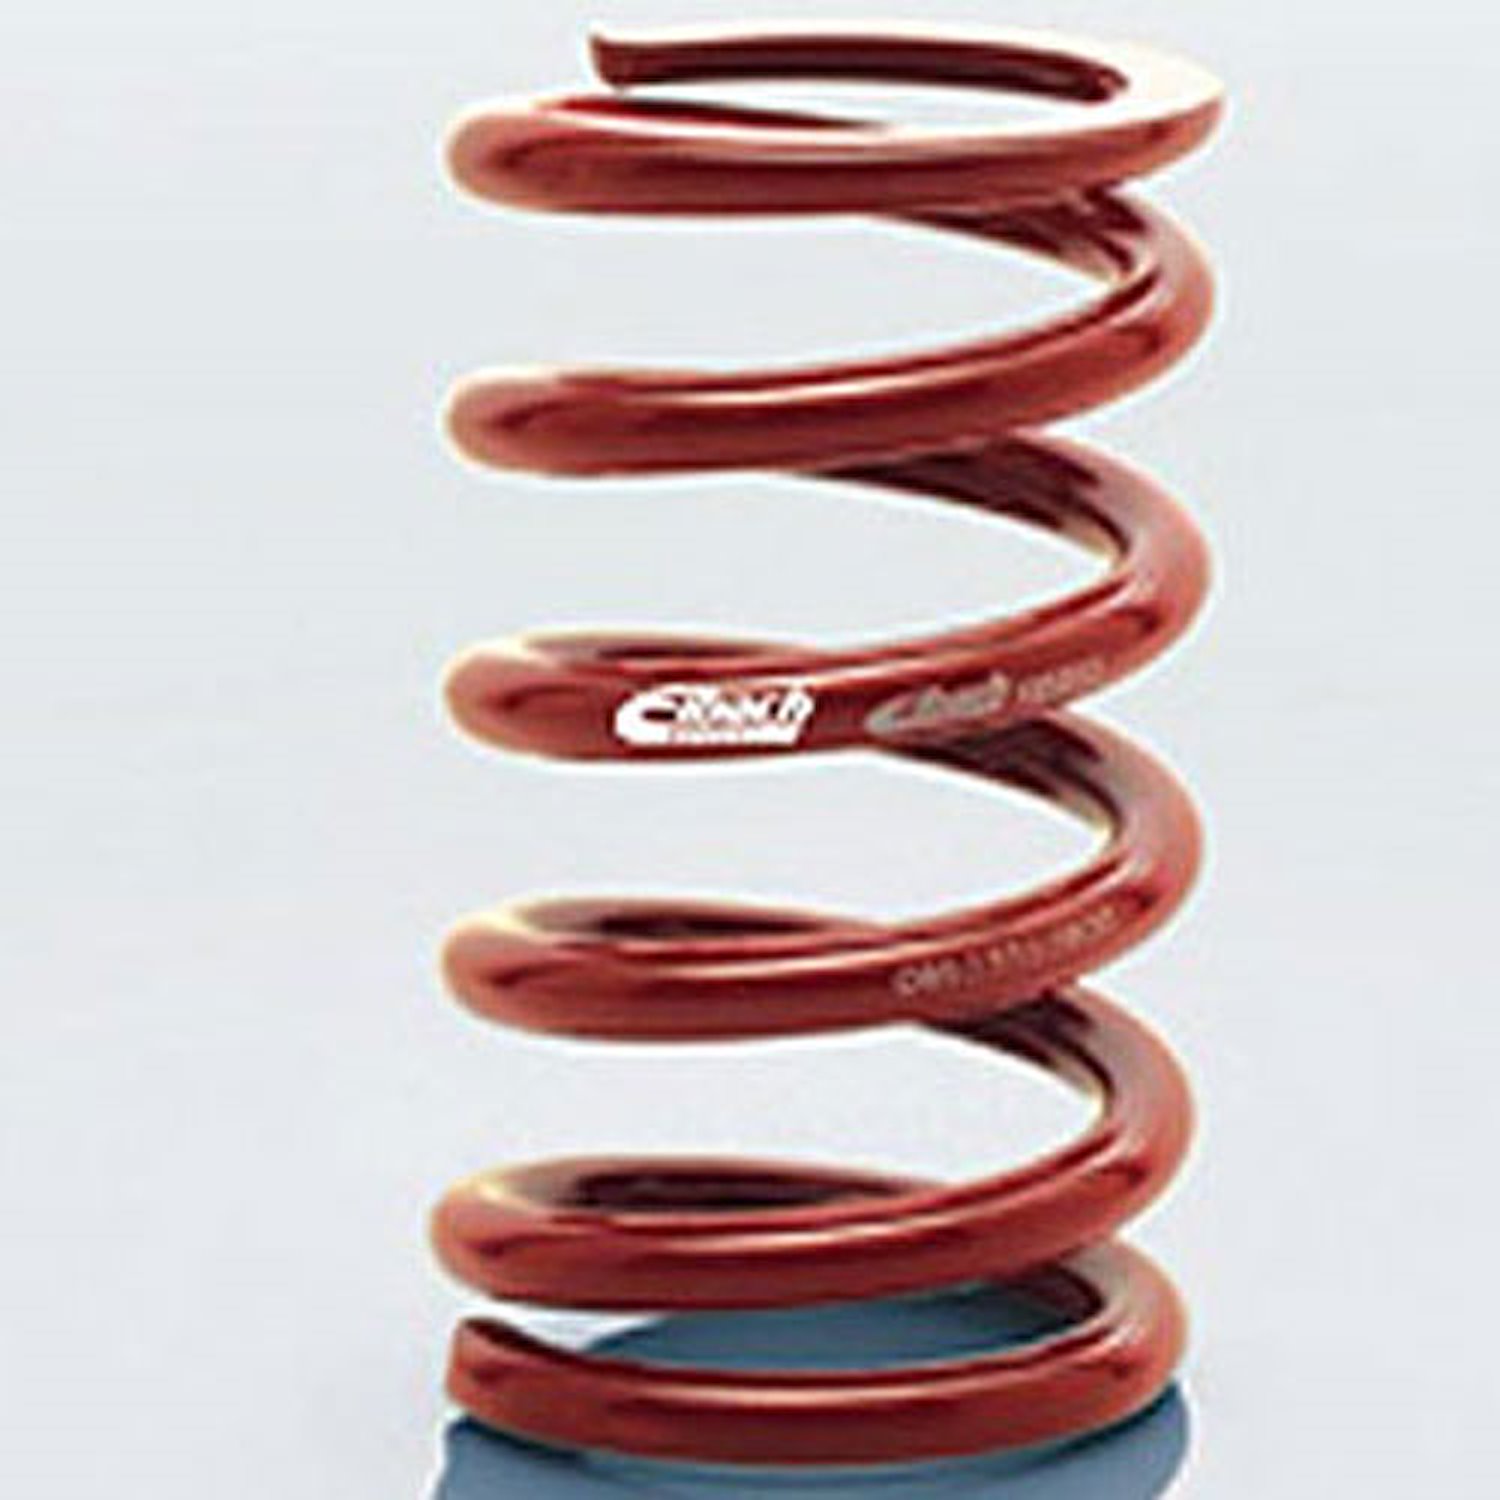 0950.550.1350 EIBACH CONVENTIONAL FRONT SPRING